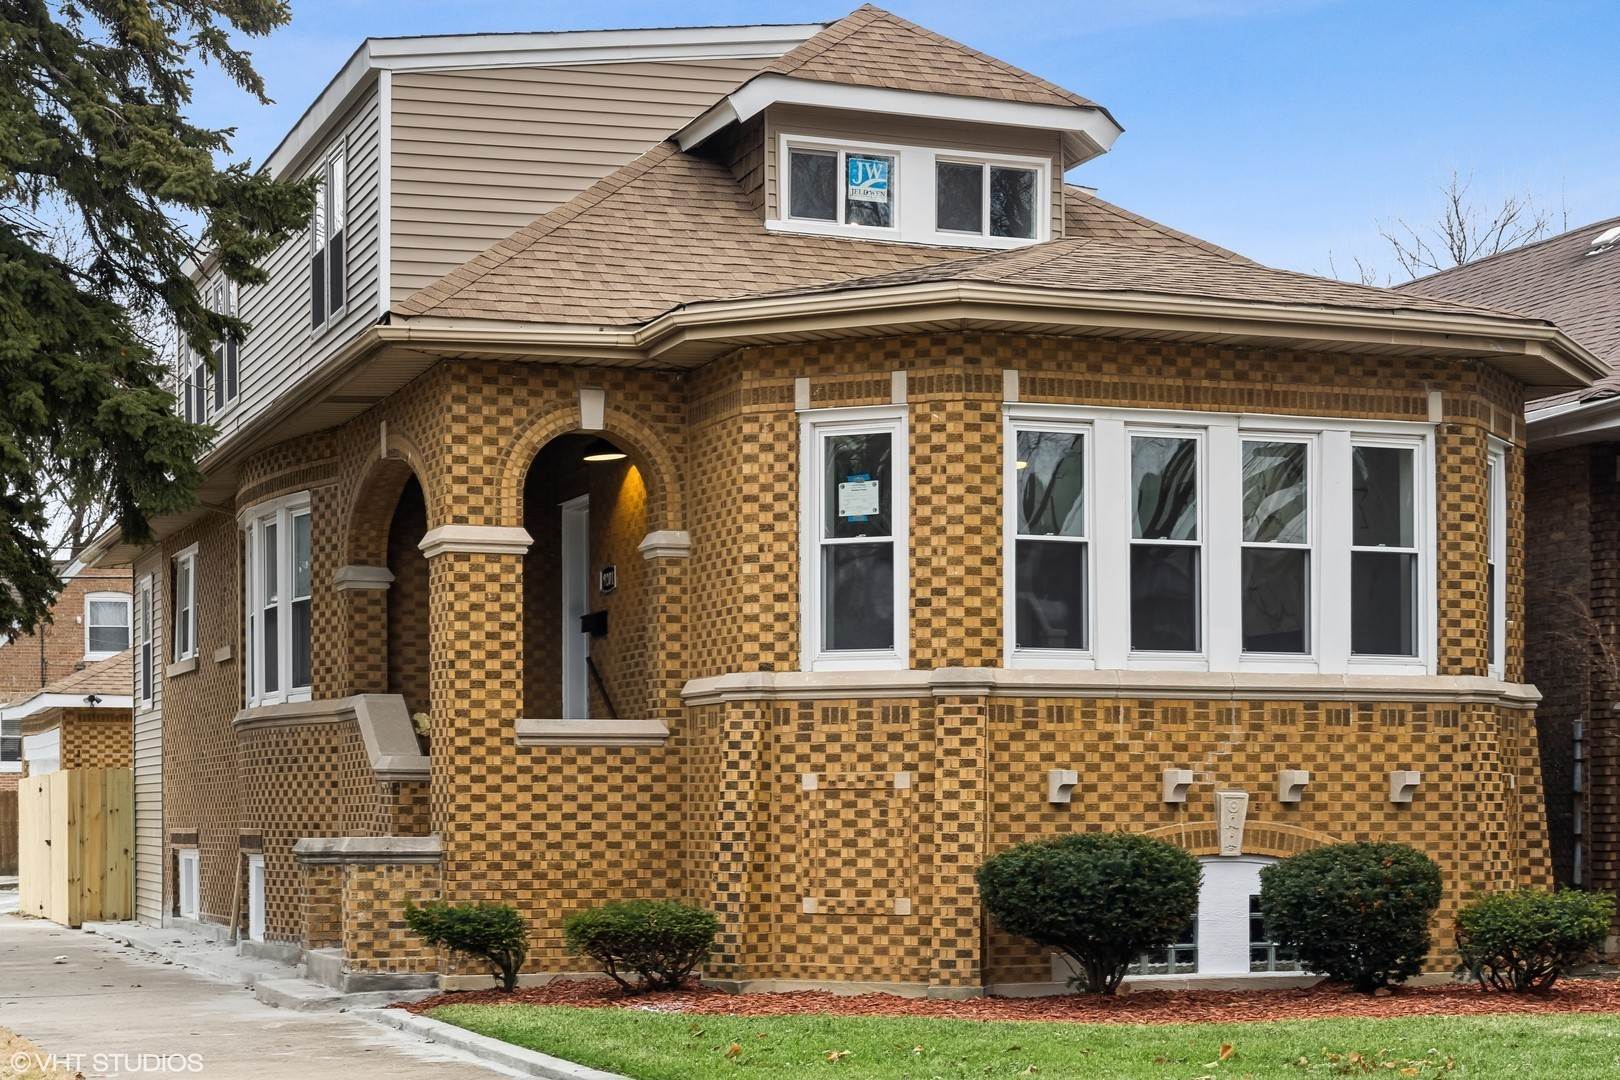 Single Family for Sale at Brainerd, Chicago, IL 60620